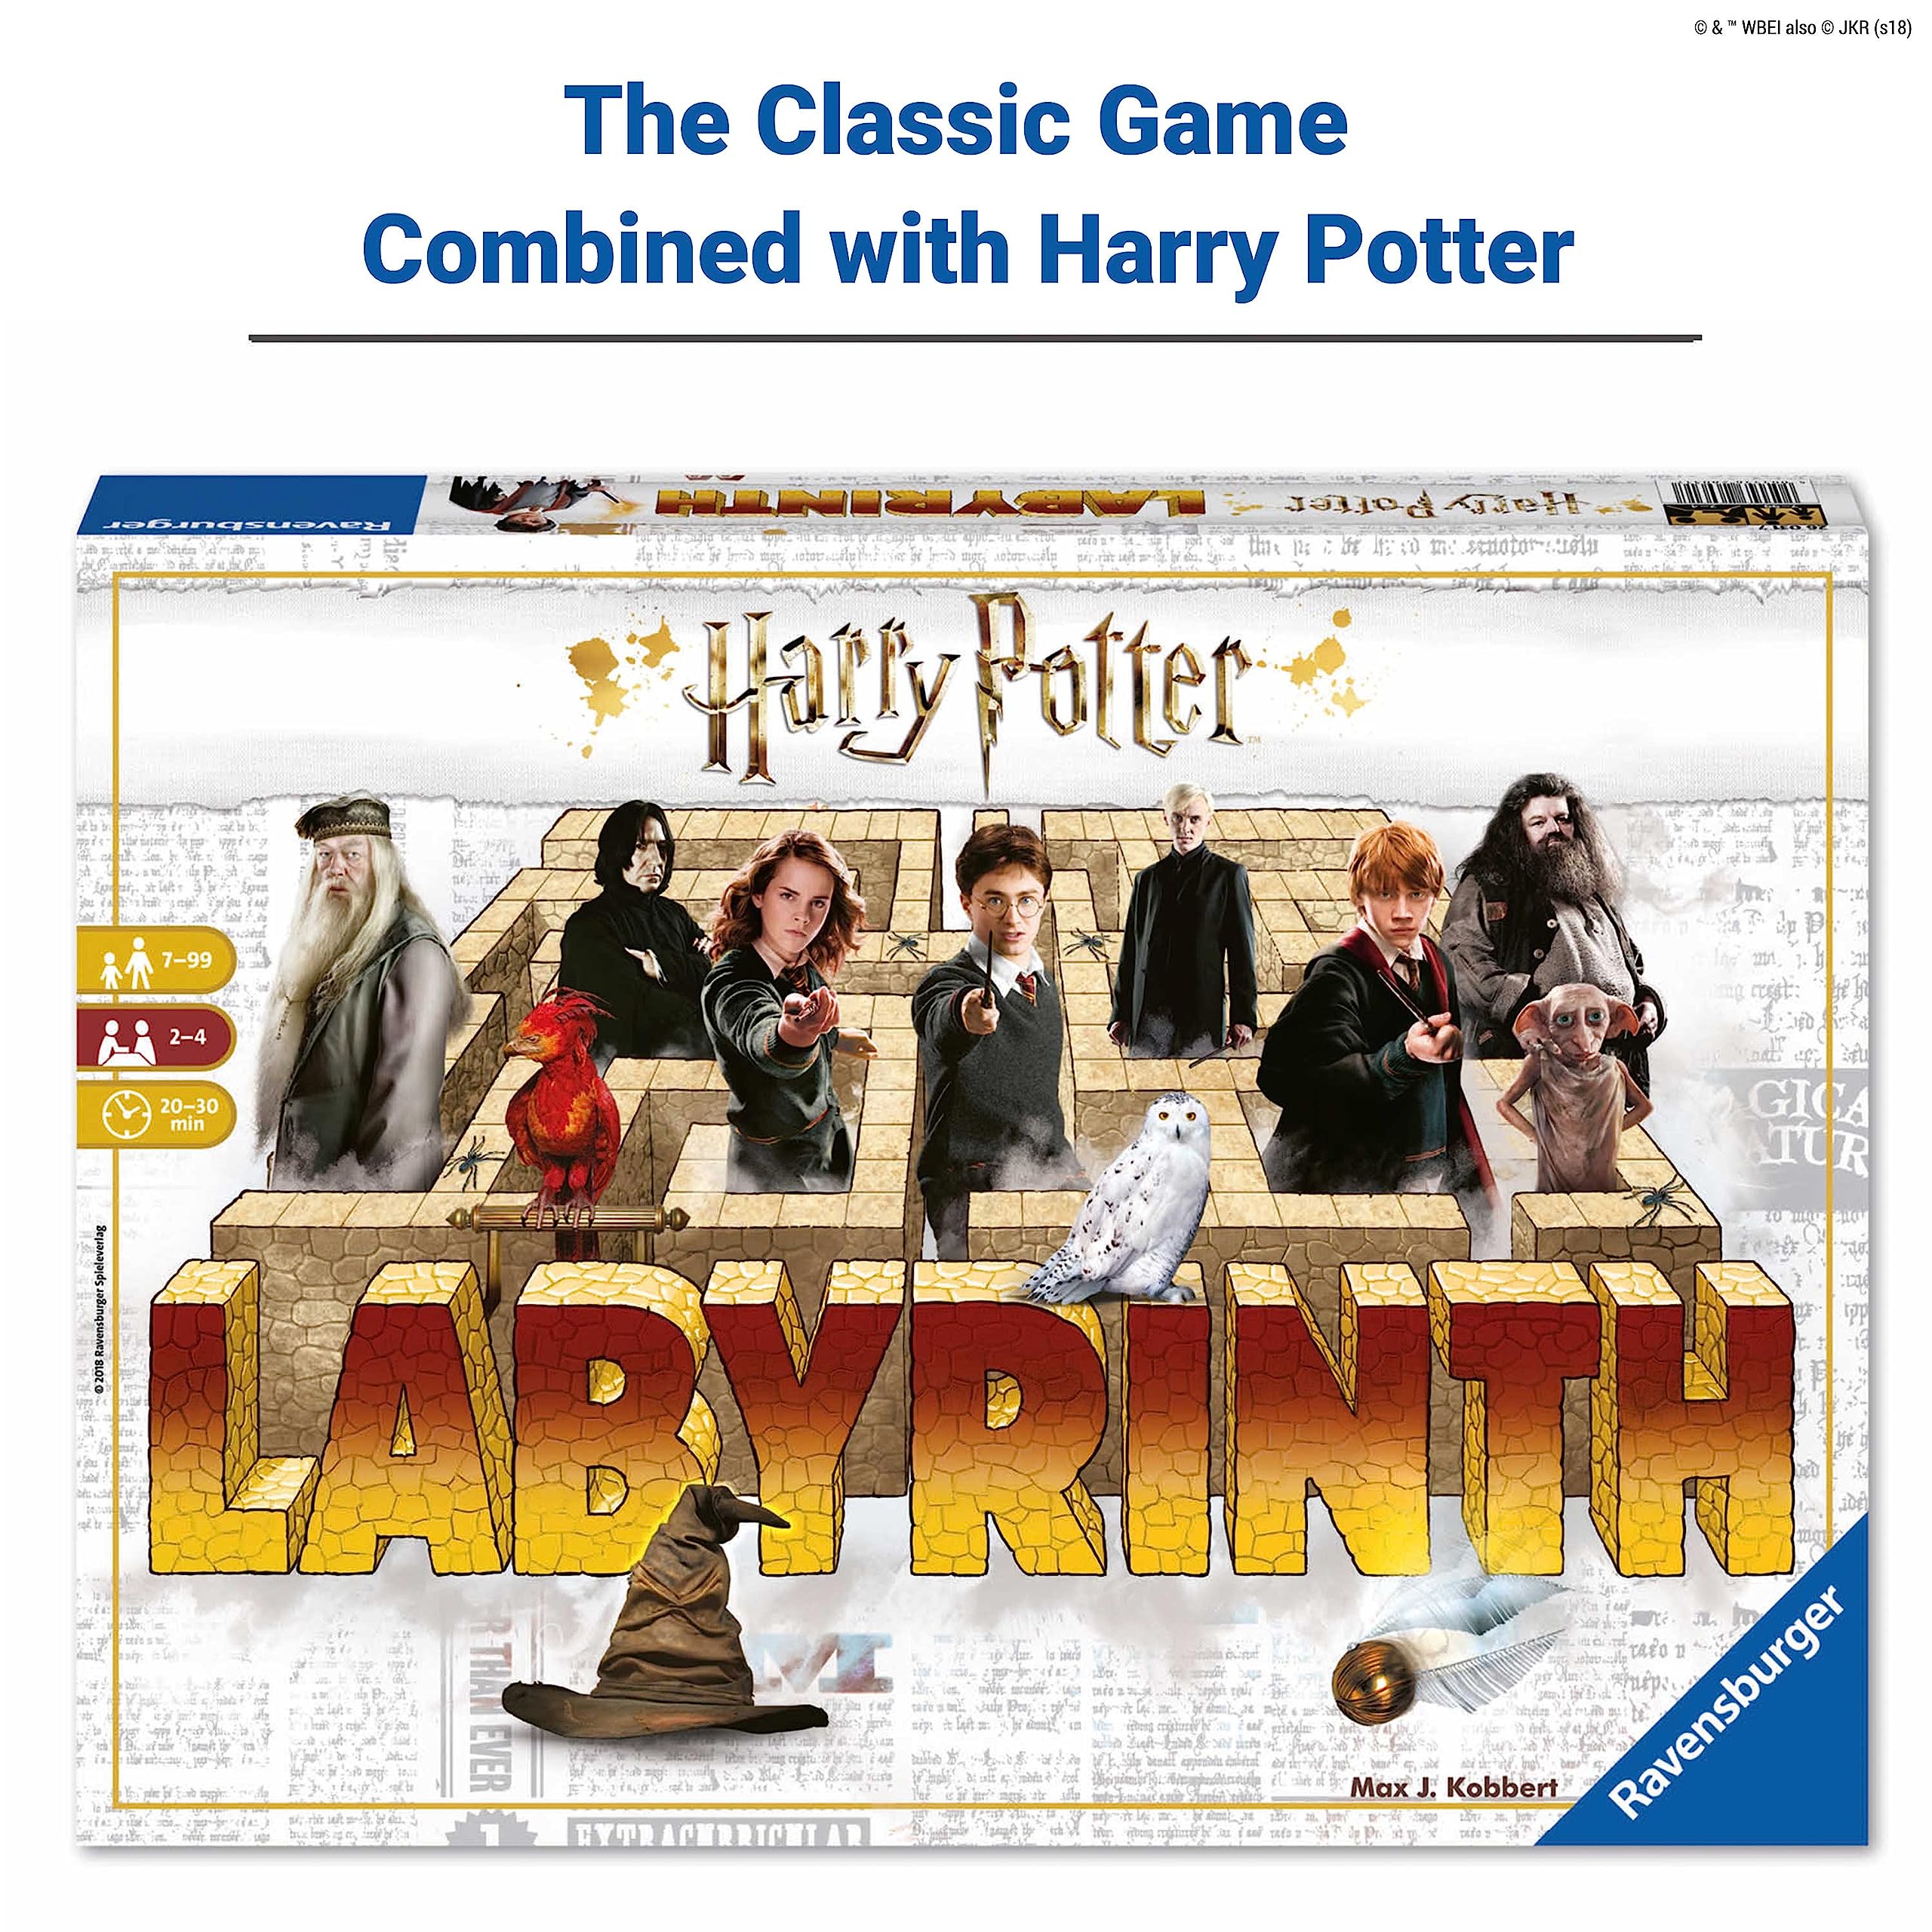 Ravensburger Harry Potter Labyrinth Family Board Game for Kids & Adults Age 7 & Up - So Easy to Learn & Play with Great Replay Value